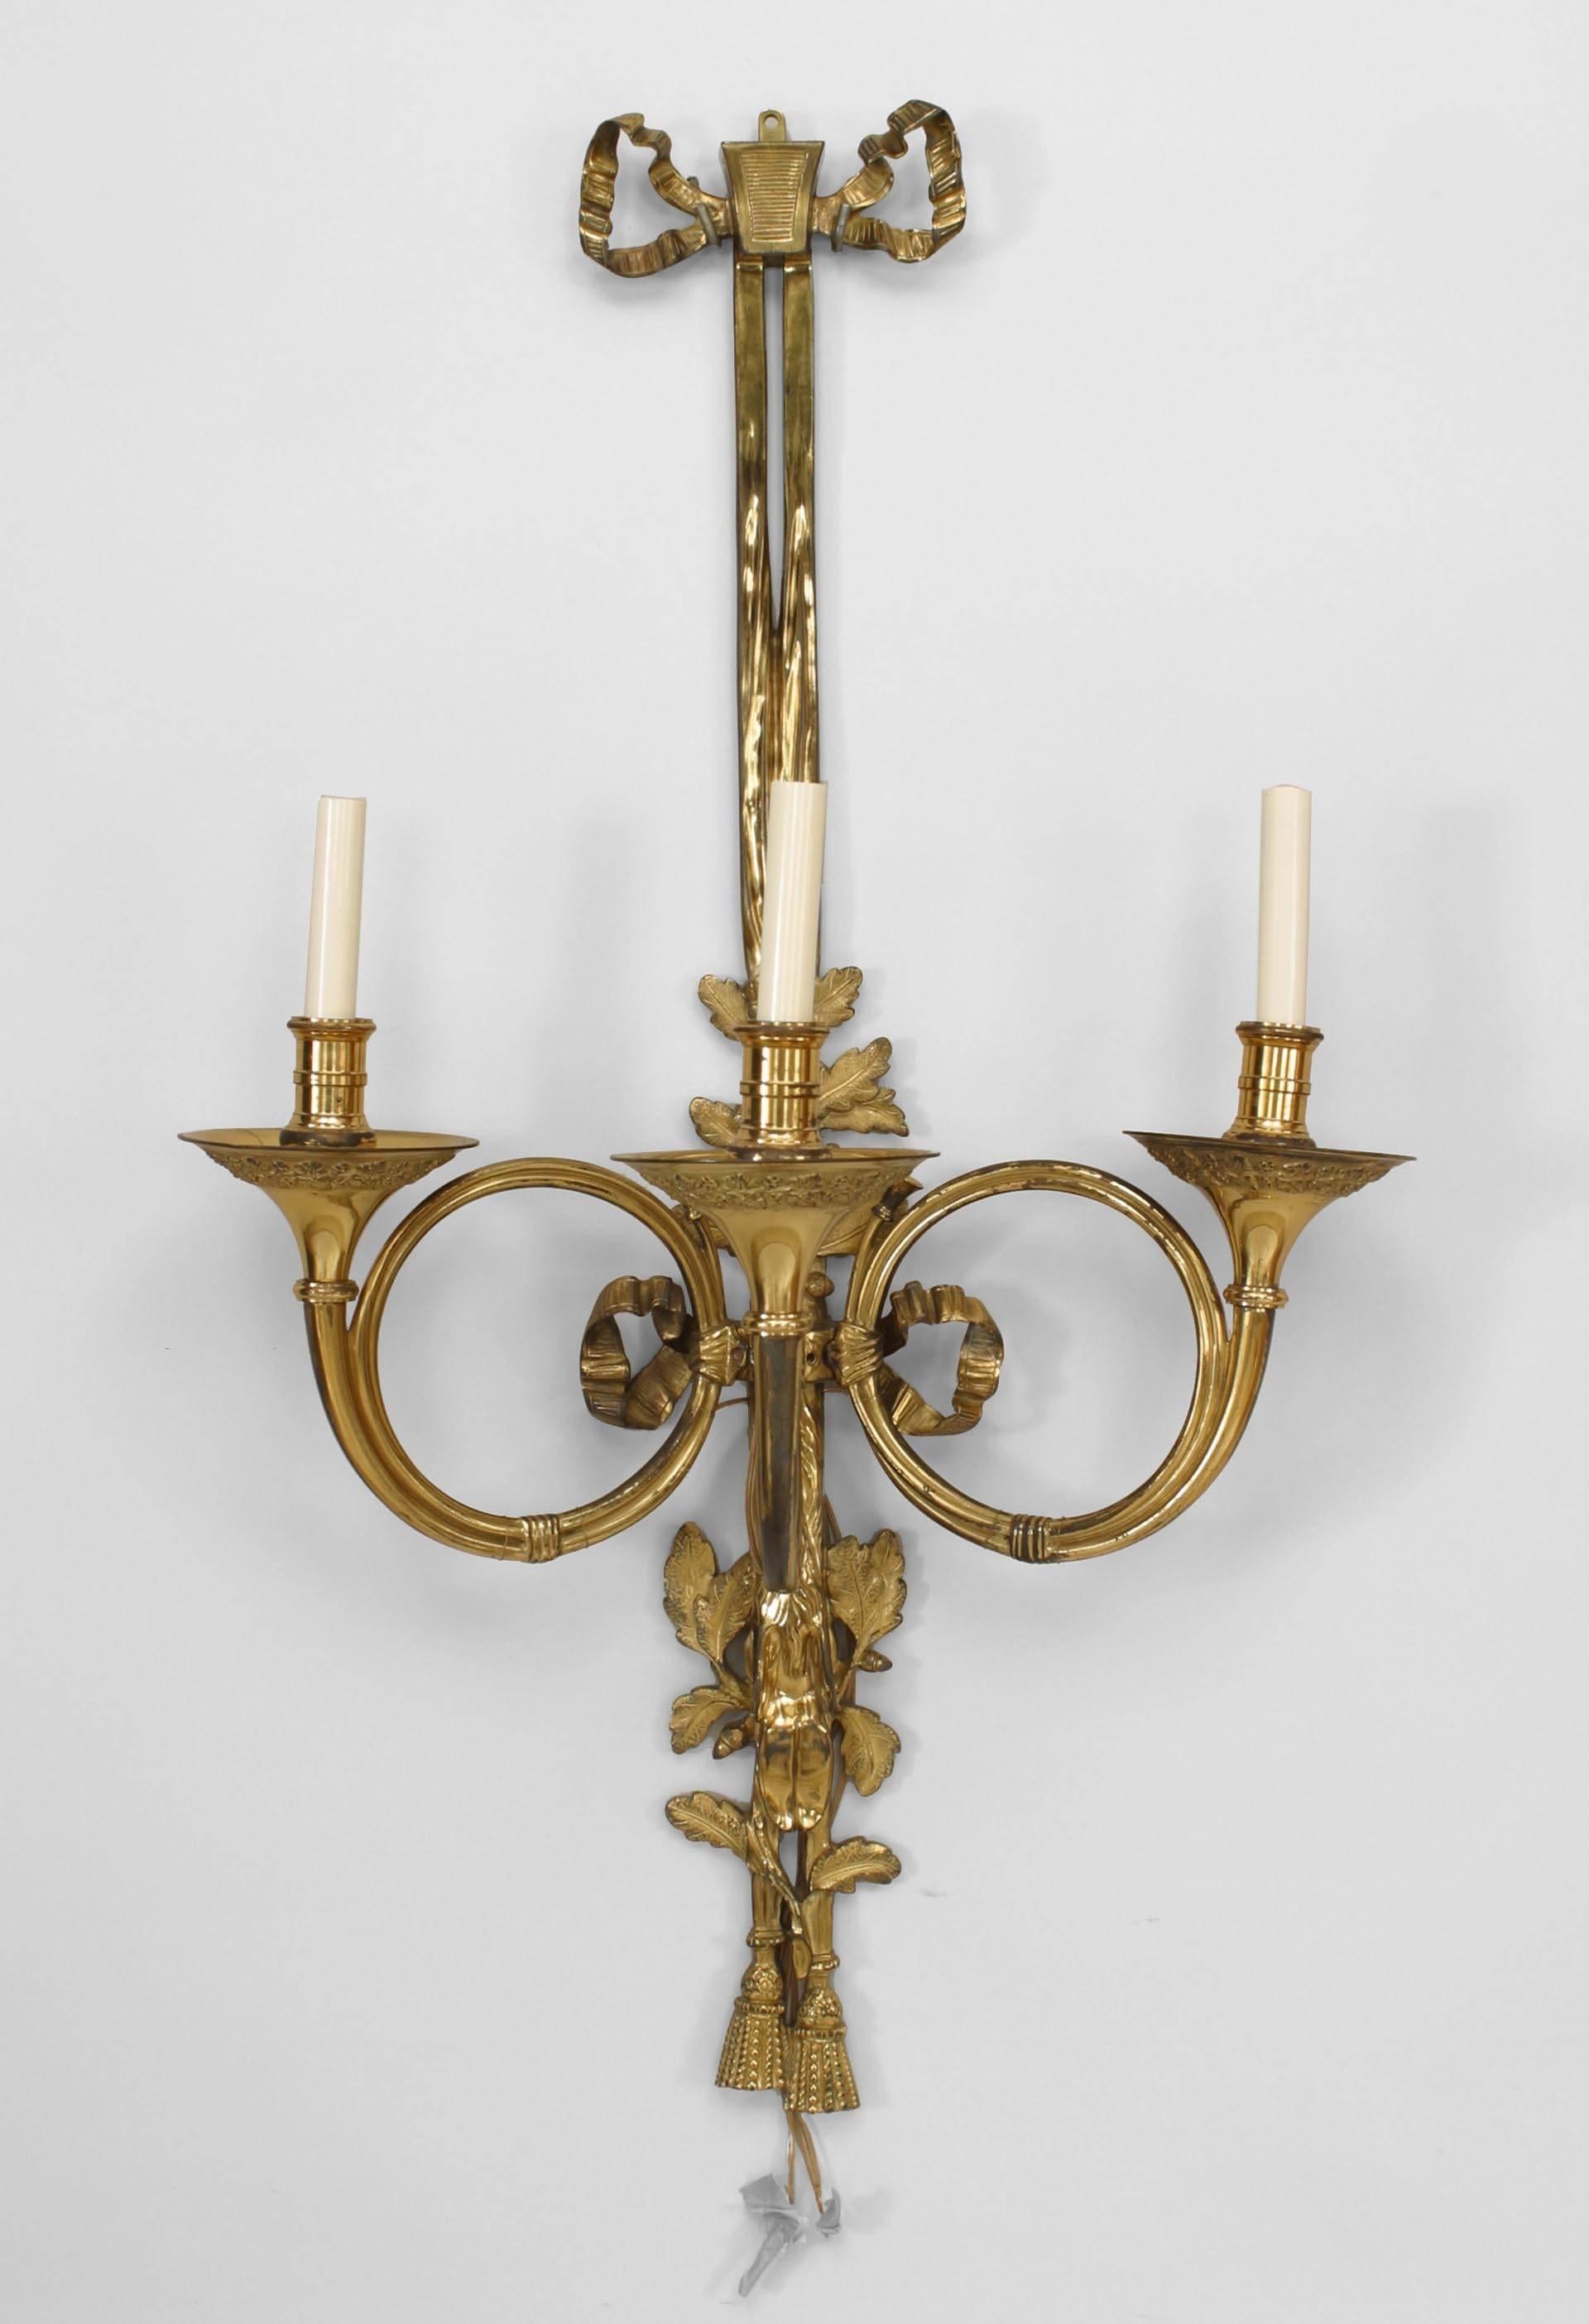 7 French Louis XVI-style (20th Century) bronze dore wall sconces with three horn-shaped arms, bow knot tops and tassel bottoms. (PRICED EACH)
